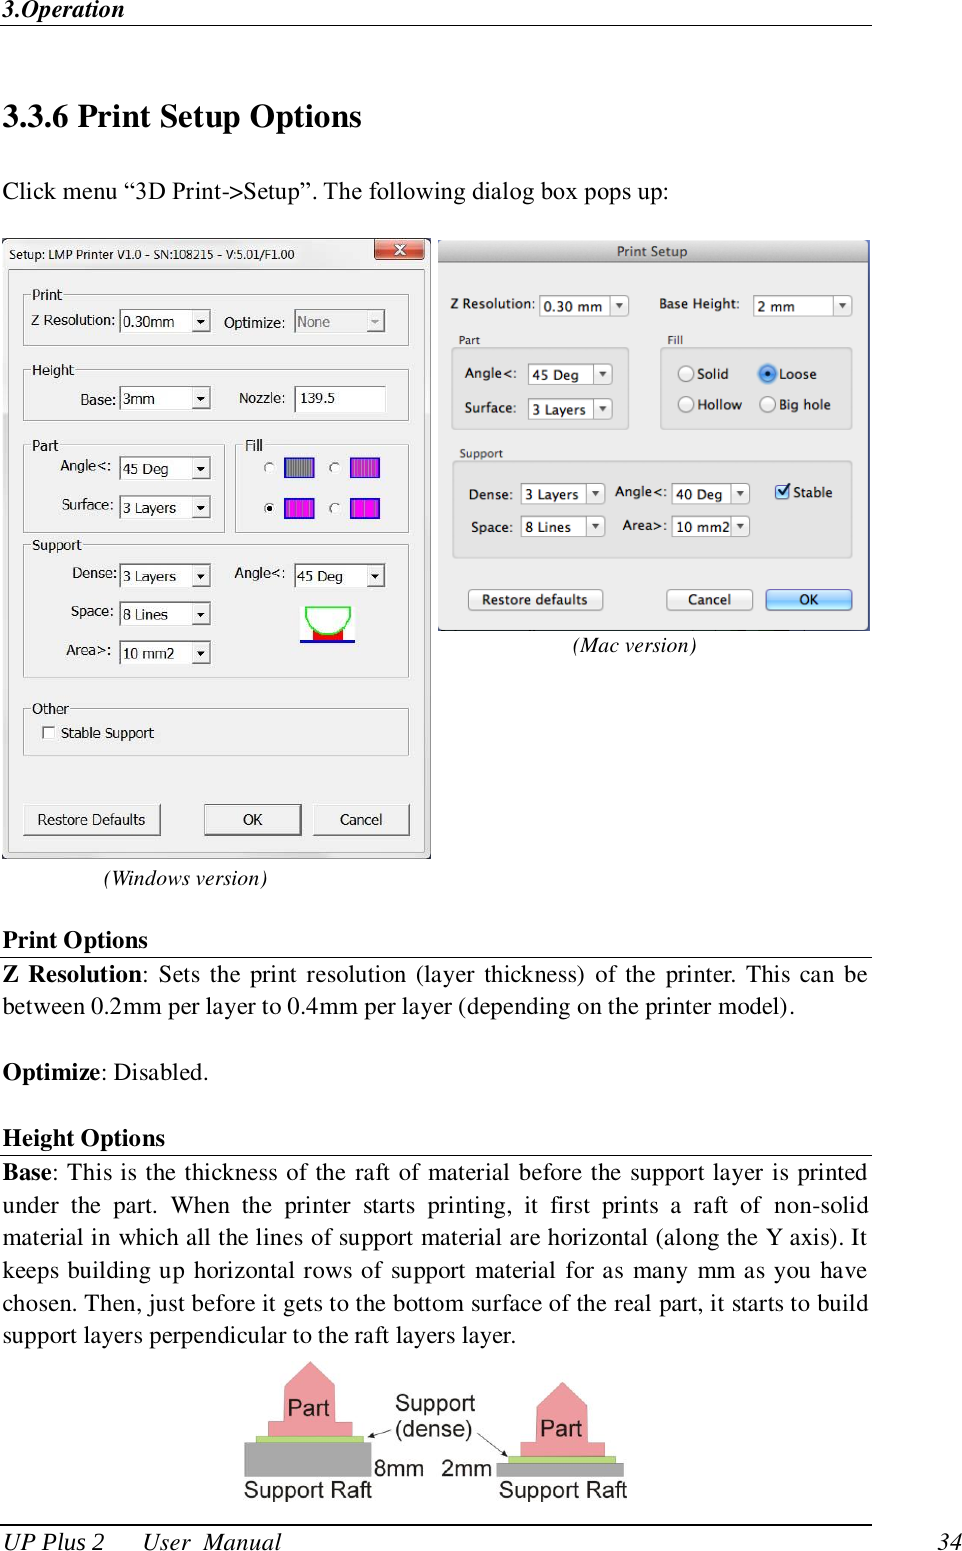 3.Operation UP Plus 2      User  Manual                                34 3.3.6 Print Setup Options Click menu ―3D Print-&gt;Setup‖. The following dialog box pops up:      Print Options Z Resolution: Sets the print resolution (layer thickness)  of the  printer. This can  be between 0.2mm per layer to 0.4mm per layer (depending on the printer model).    Optimize: Disabled.    Height Options Base: This is the thickness of the raft of material before the support layer is printed under  the  part.  When  the  printer  starts  printing,  it  first  prints  a  raft  of  non-solid material in which all the lines of support material are horizontal (along the Y axis). It keeps building up horizontal rows of support material for as many mm as you have chosen. Then, just before it gets to the bottom surface of the real part, it starts to build support layers perpendicular to the raft layers layer.    (Mac version) (Windows version) 